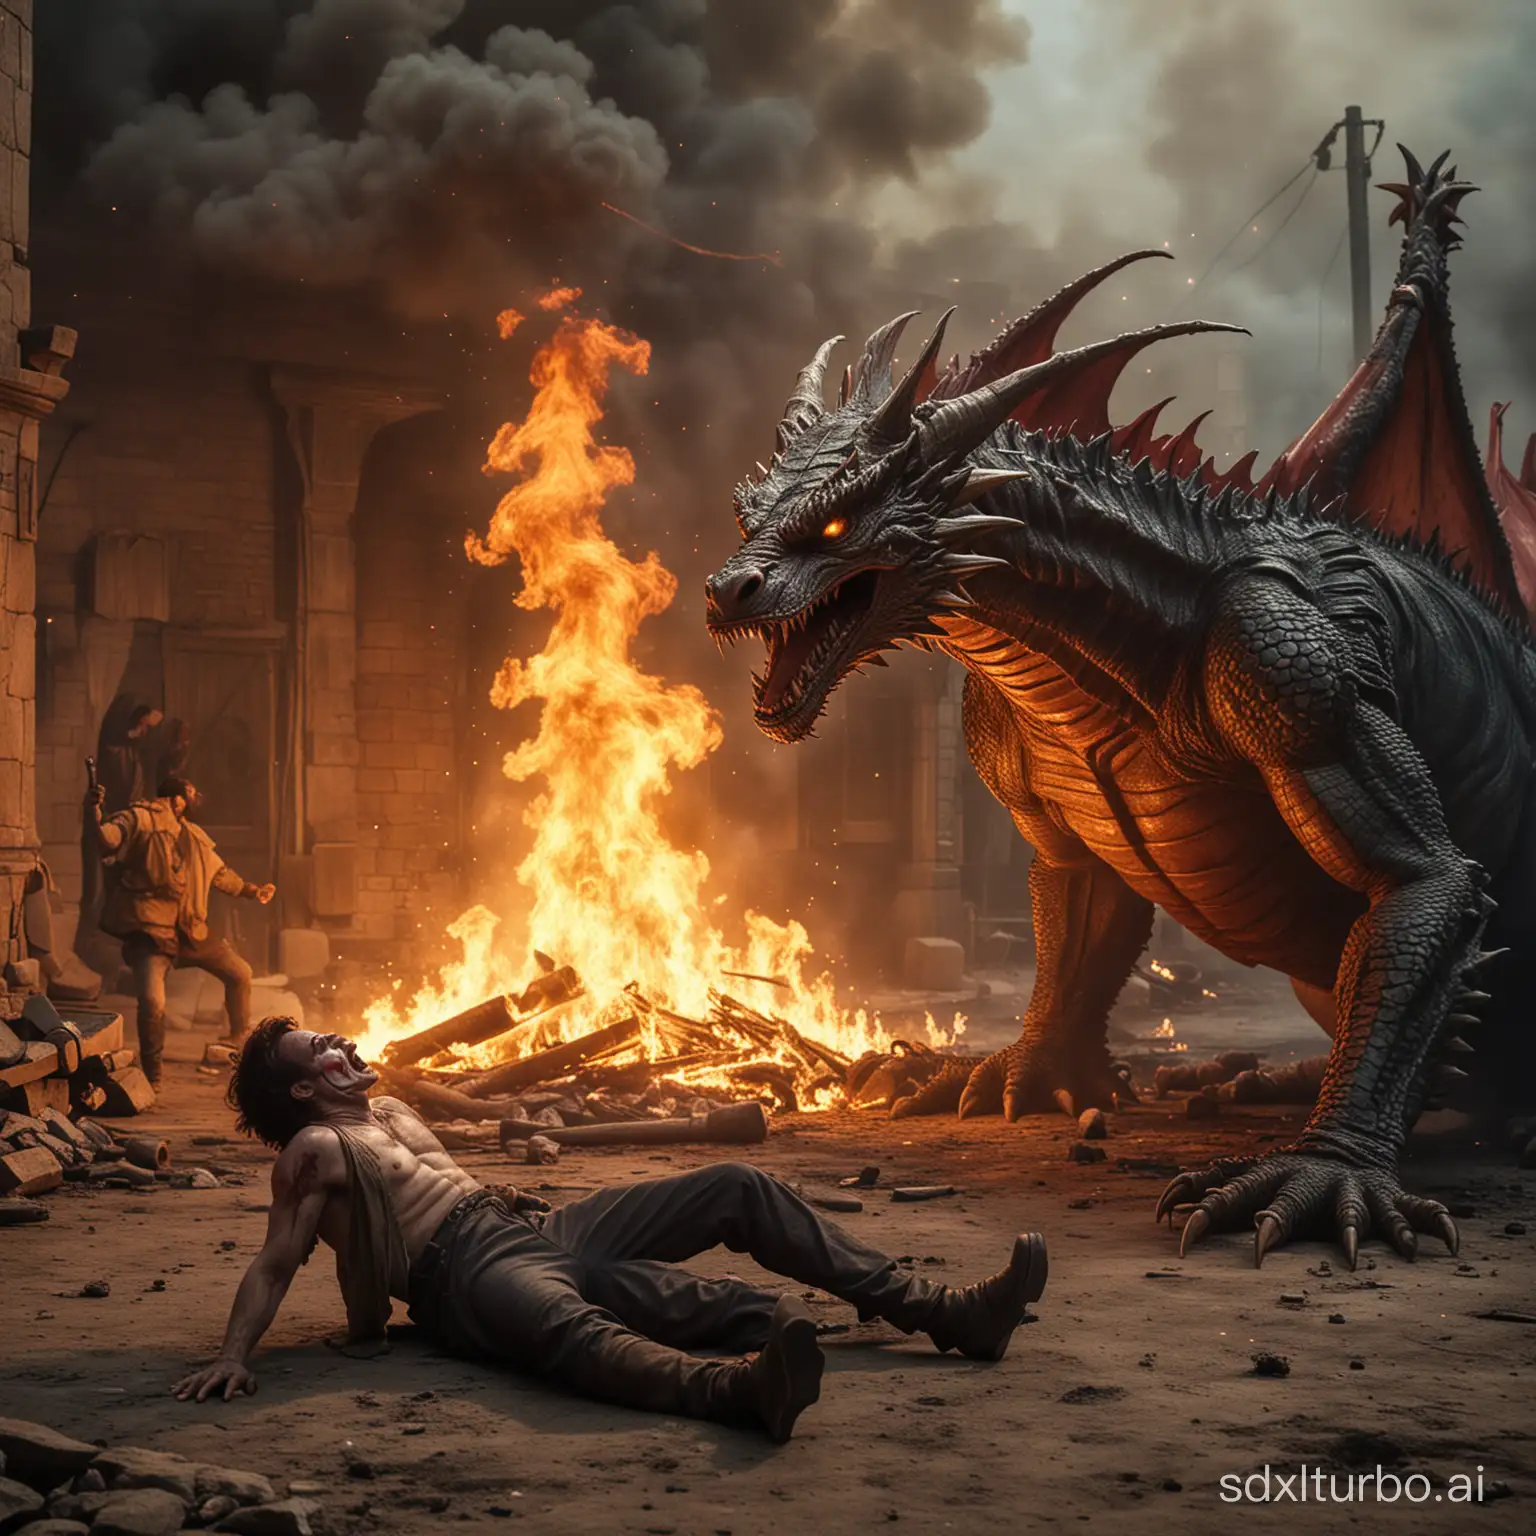 The scene where the clown is beaten up by the fire-breathing dragon.